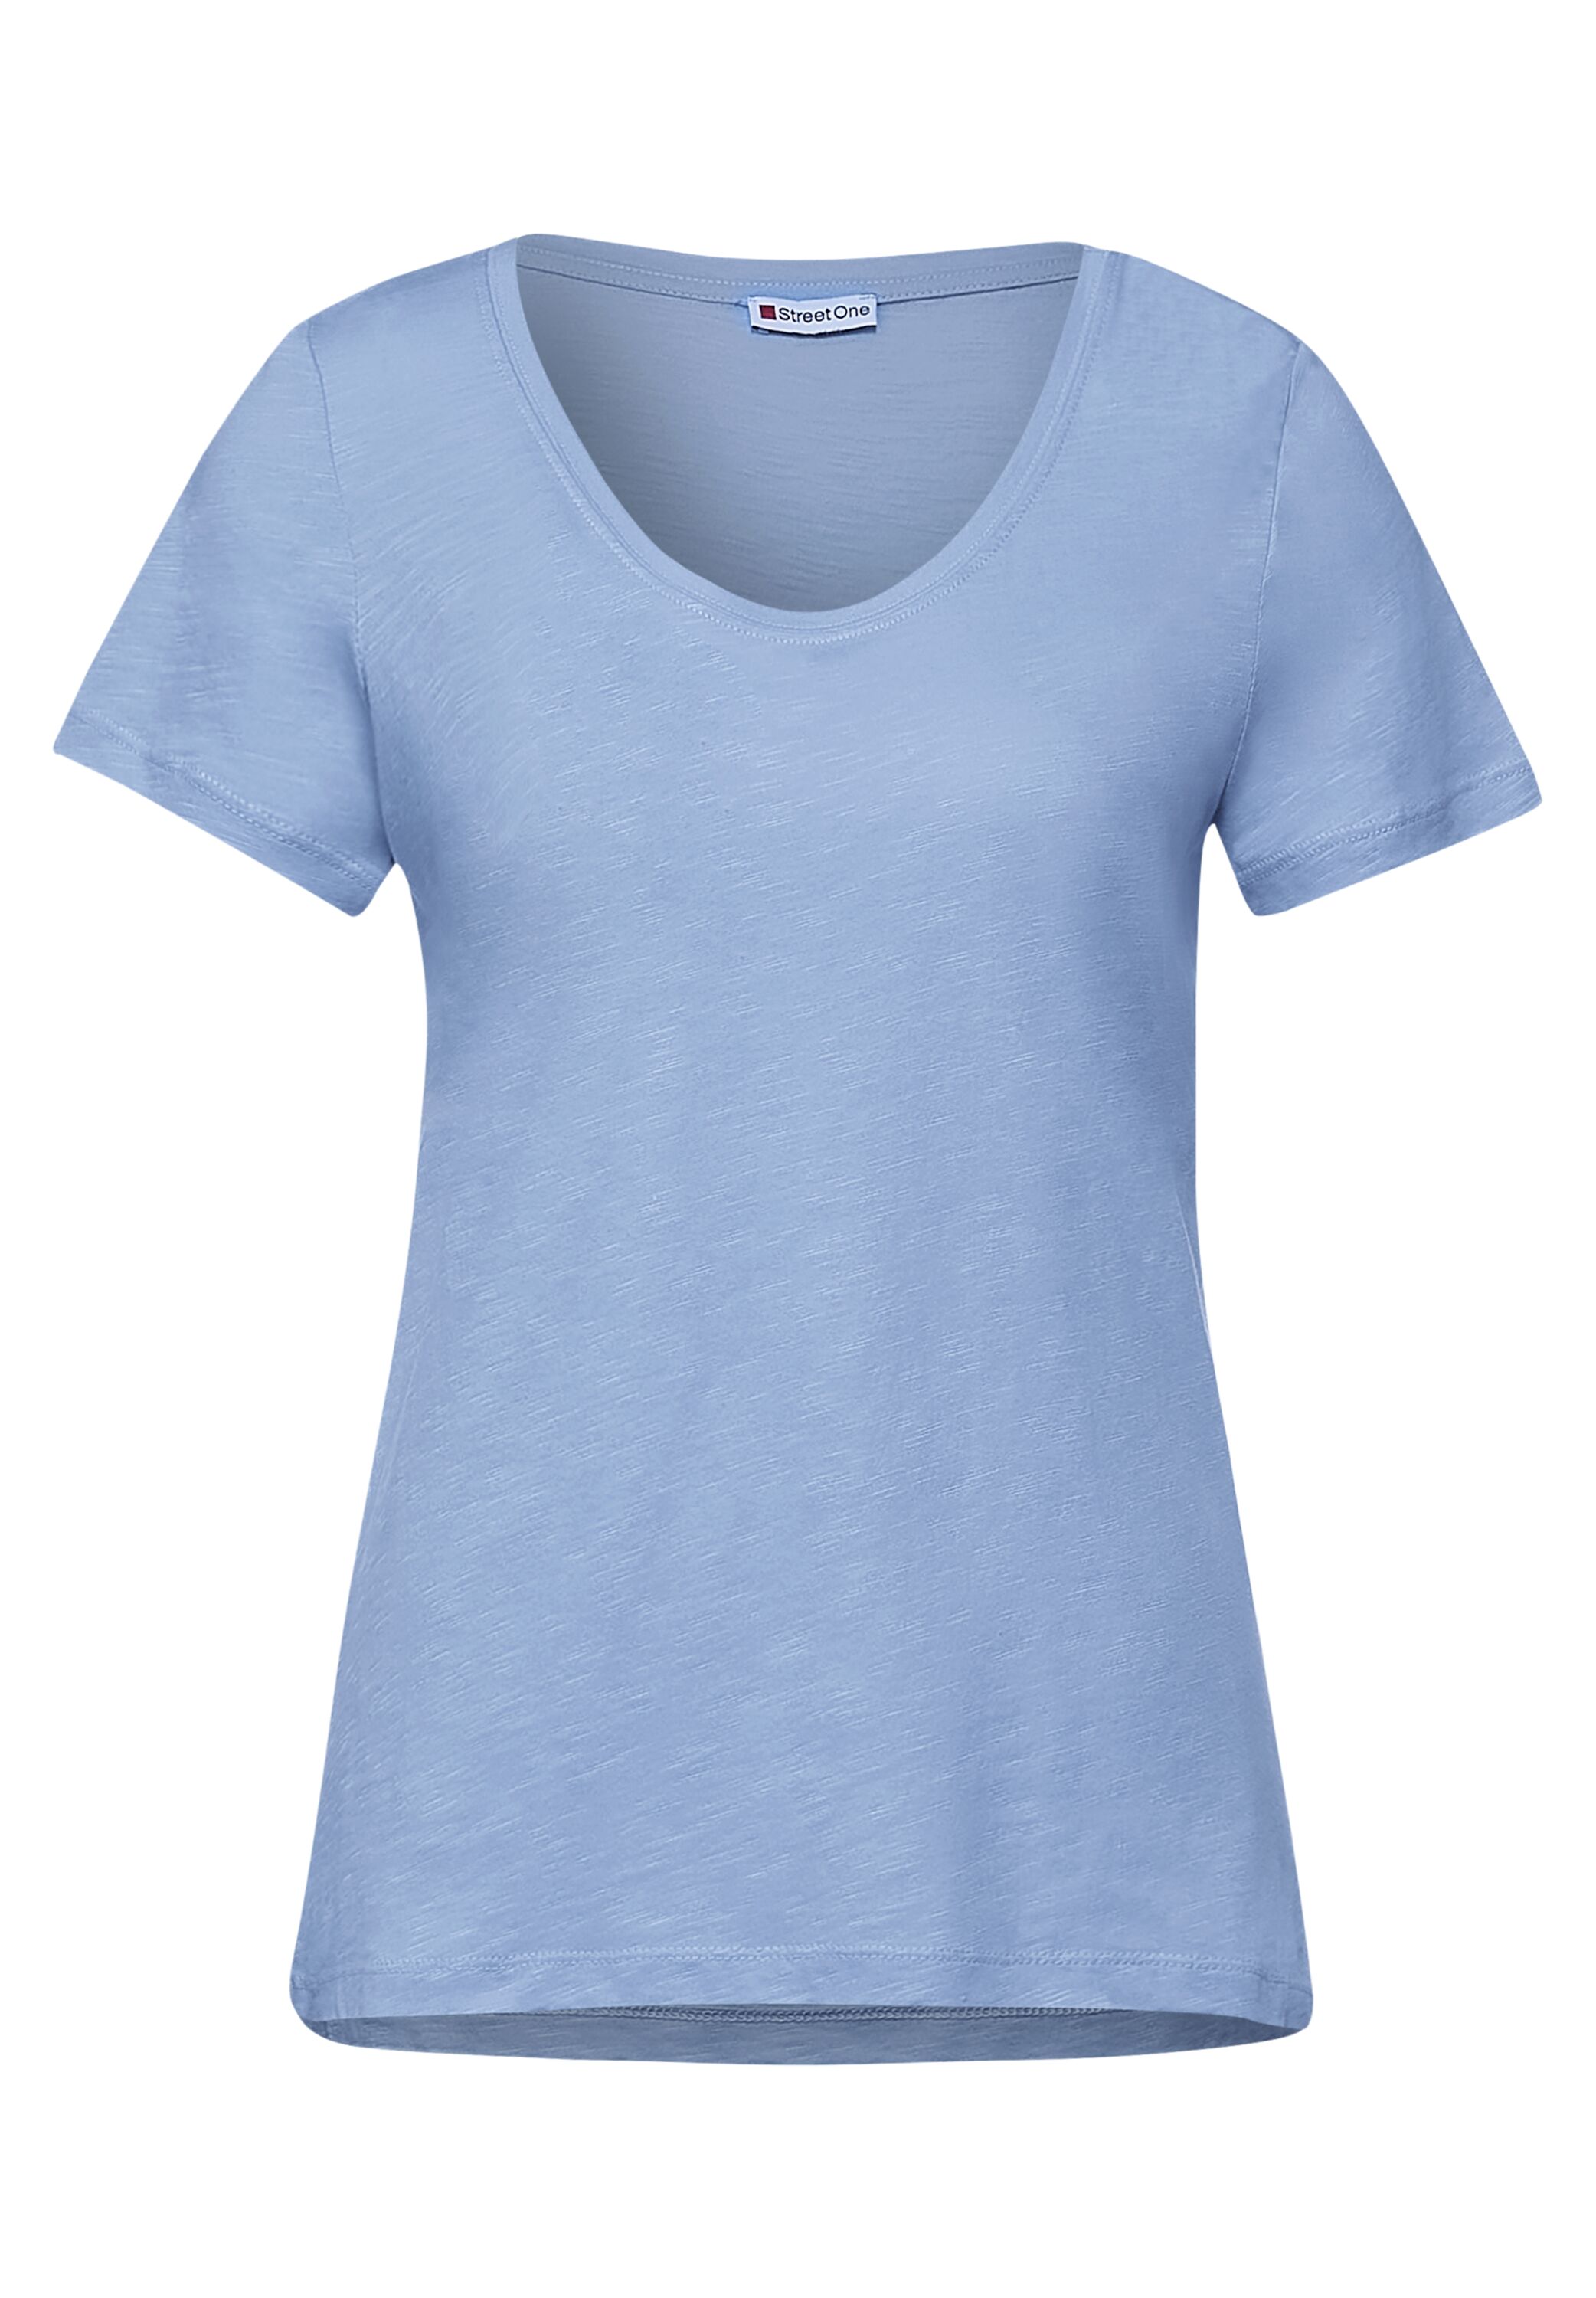 Street One T-Shirt Gerda in - A316300-13032 Sunny Blue Mode Mid CONCEPT